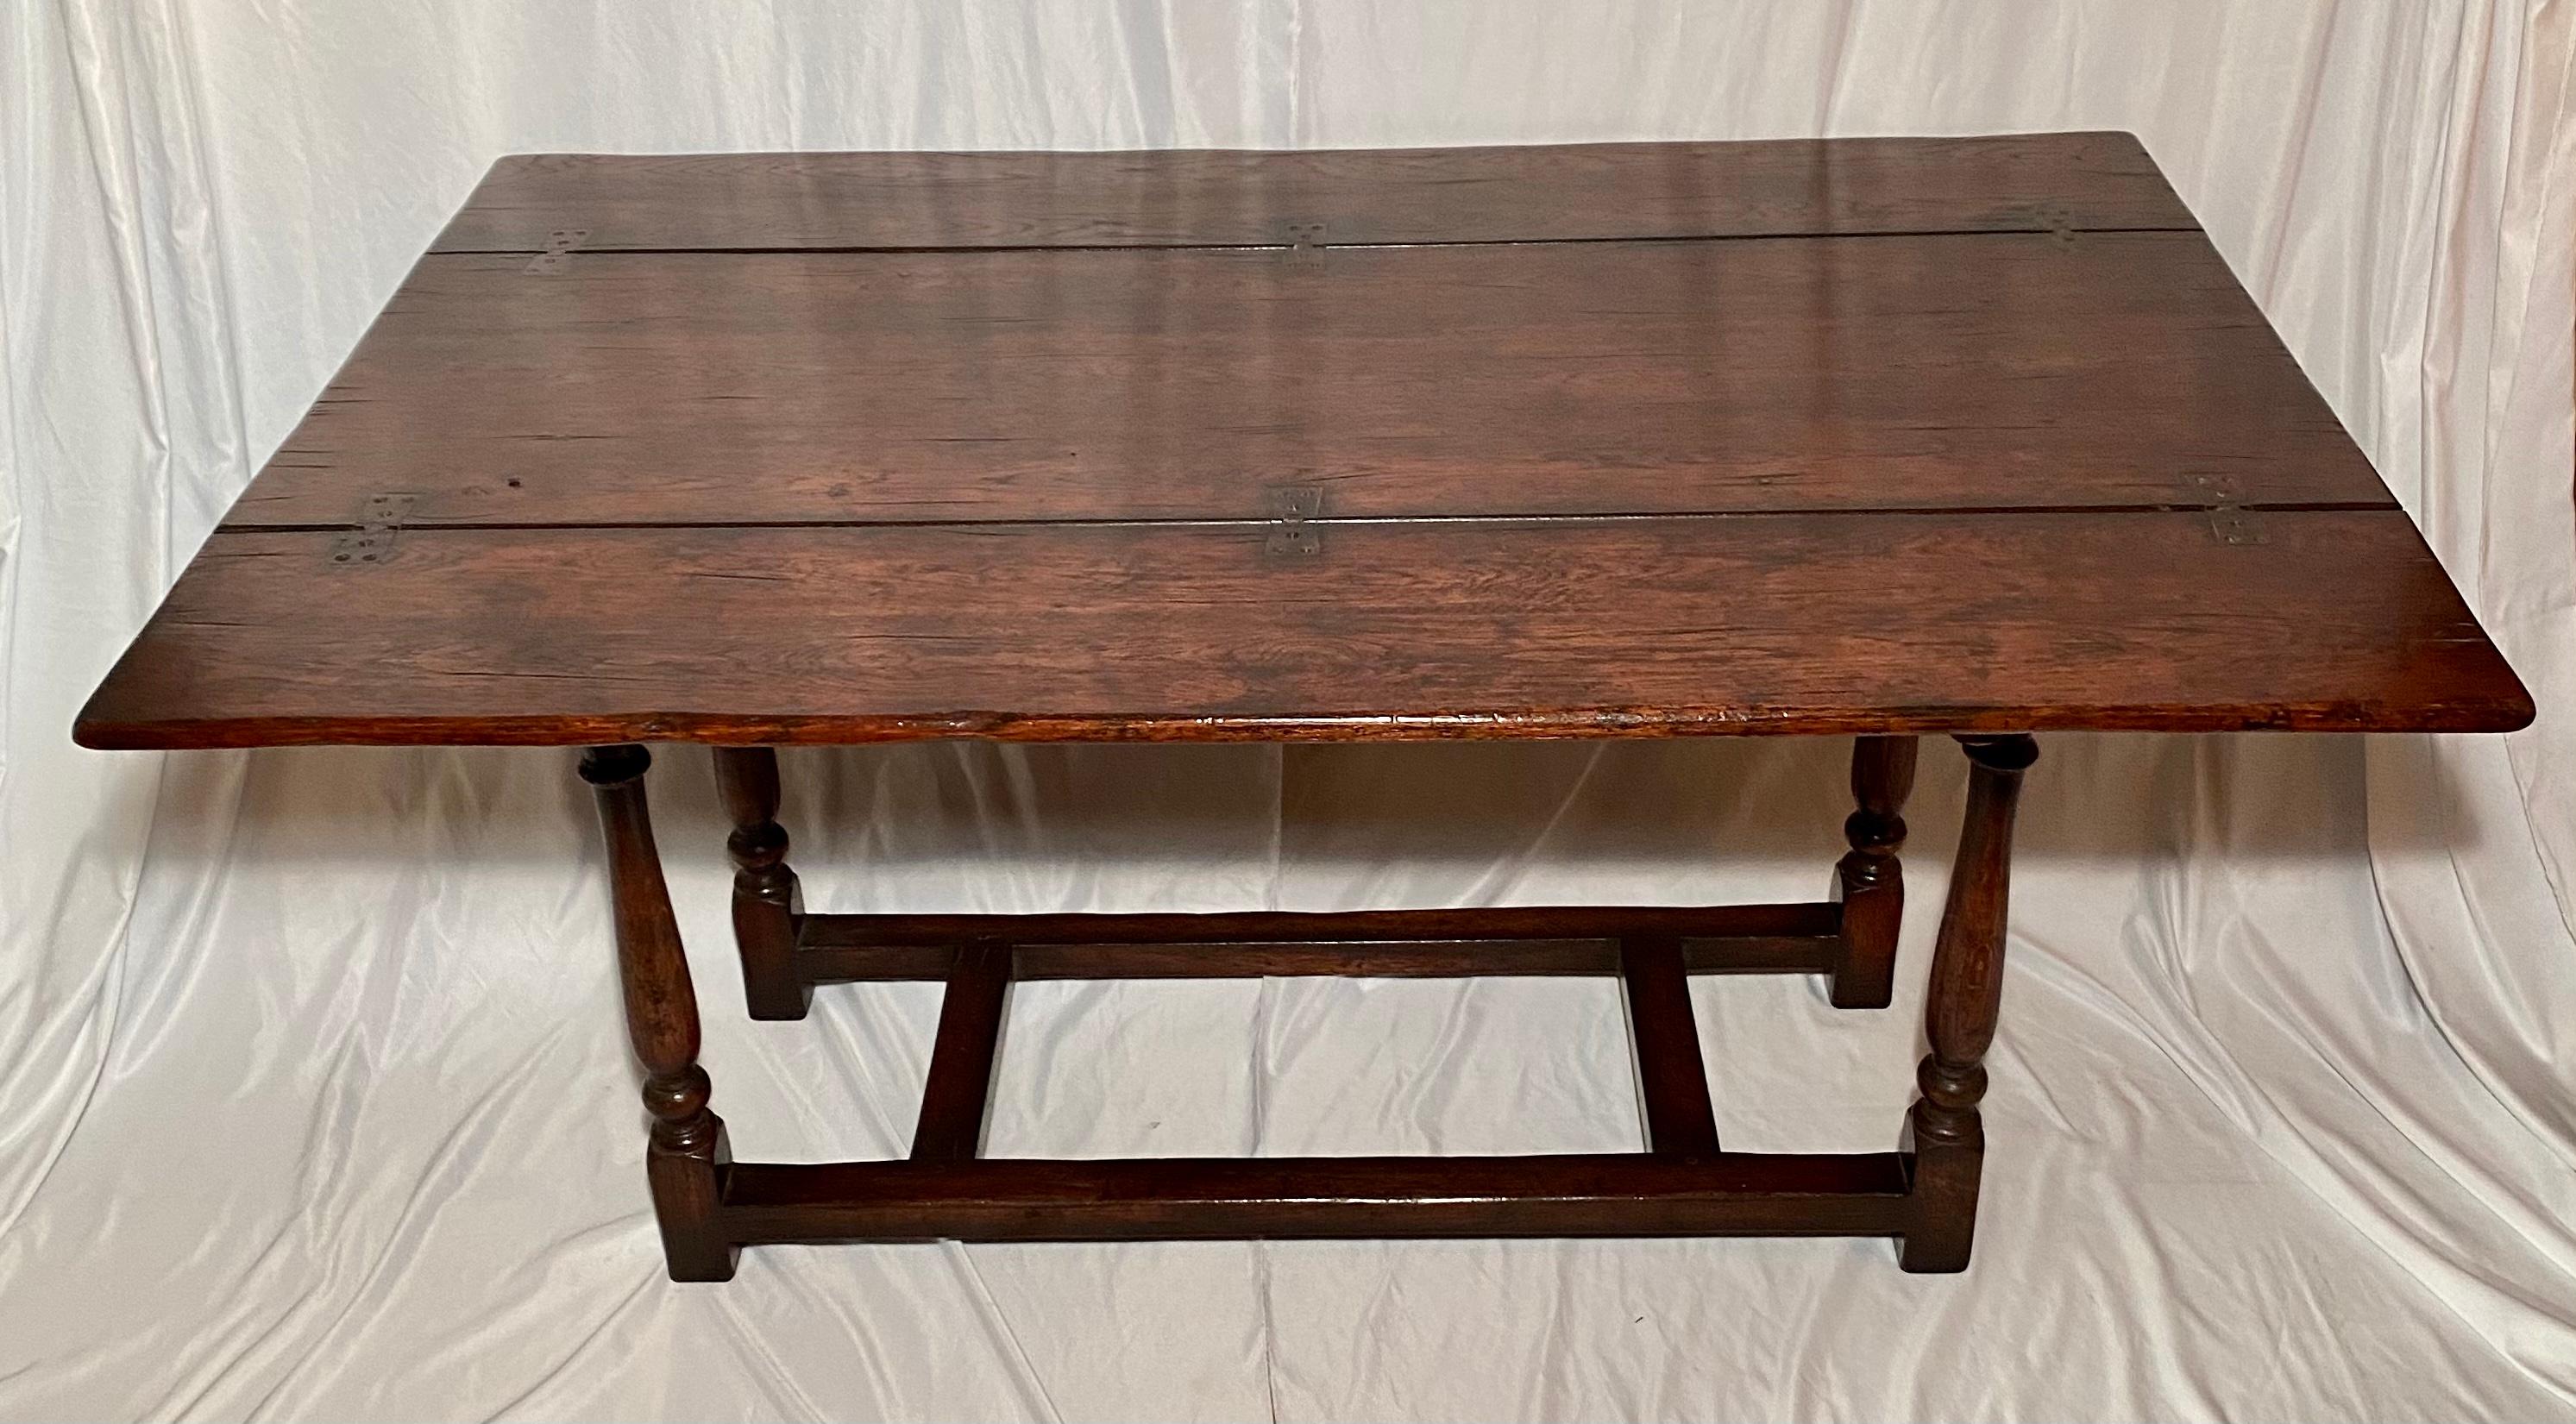 Handmade English Oak Envelope Folding Farm Table.  Can be used as a dining table, entry table, console or library table.
  
  